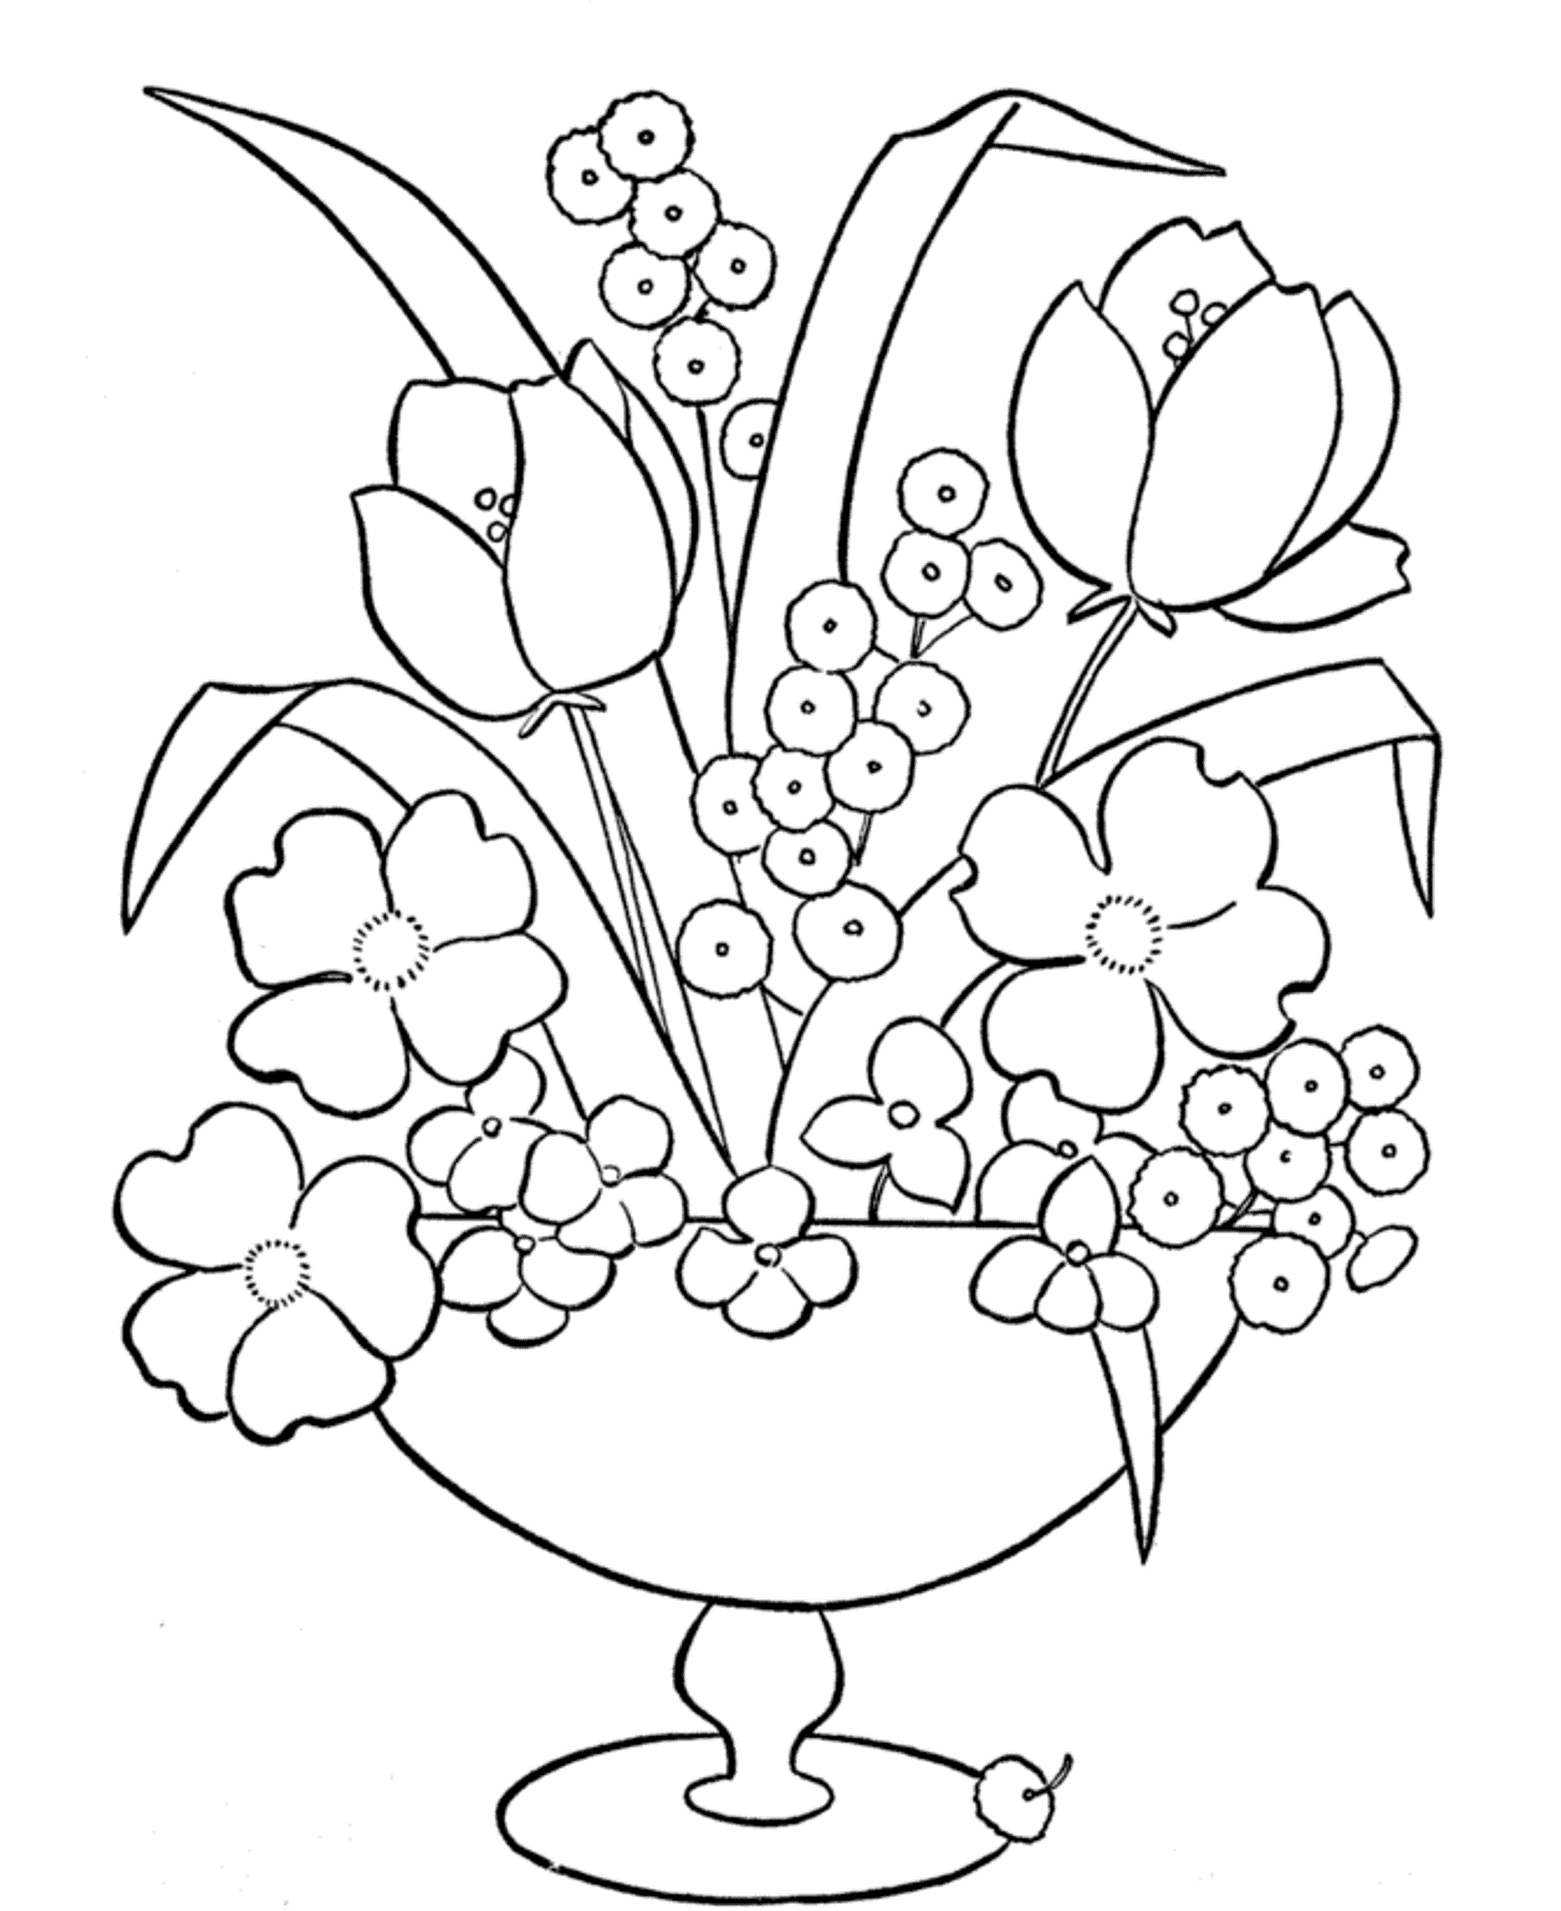 Free Vase And Flowers Coloring Page Download Free Vase And Flowers 